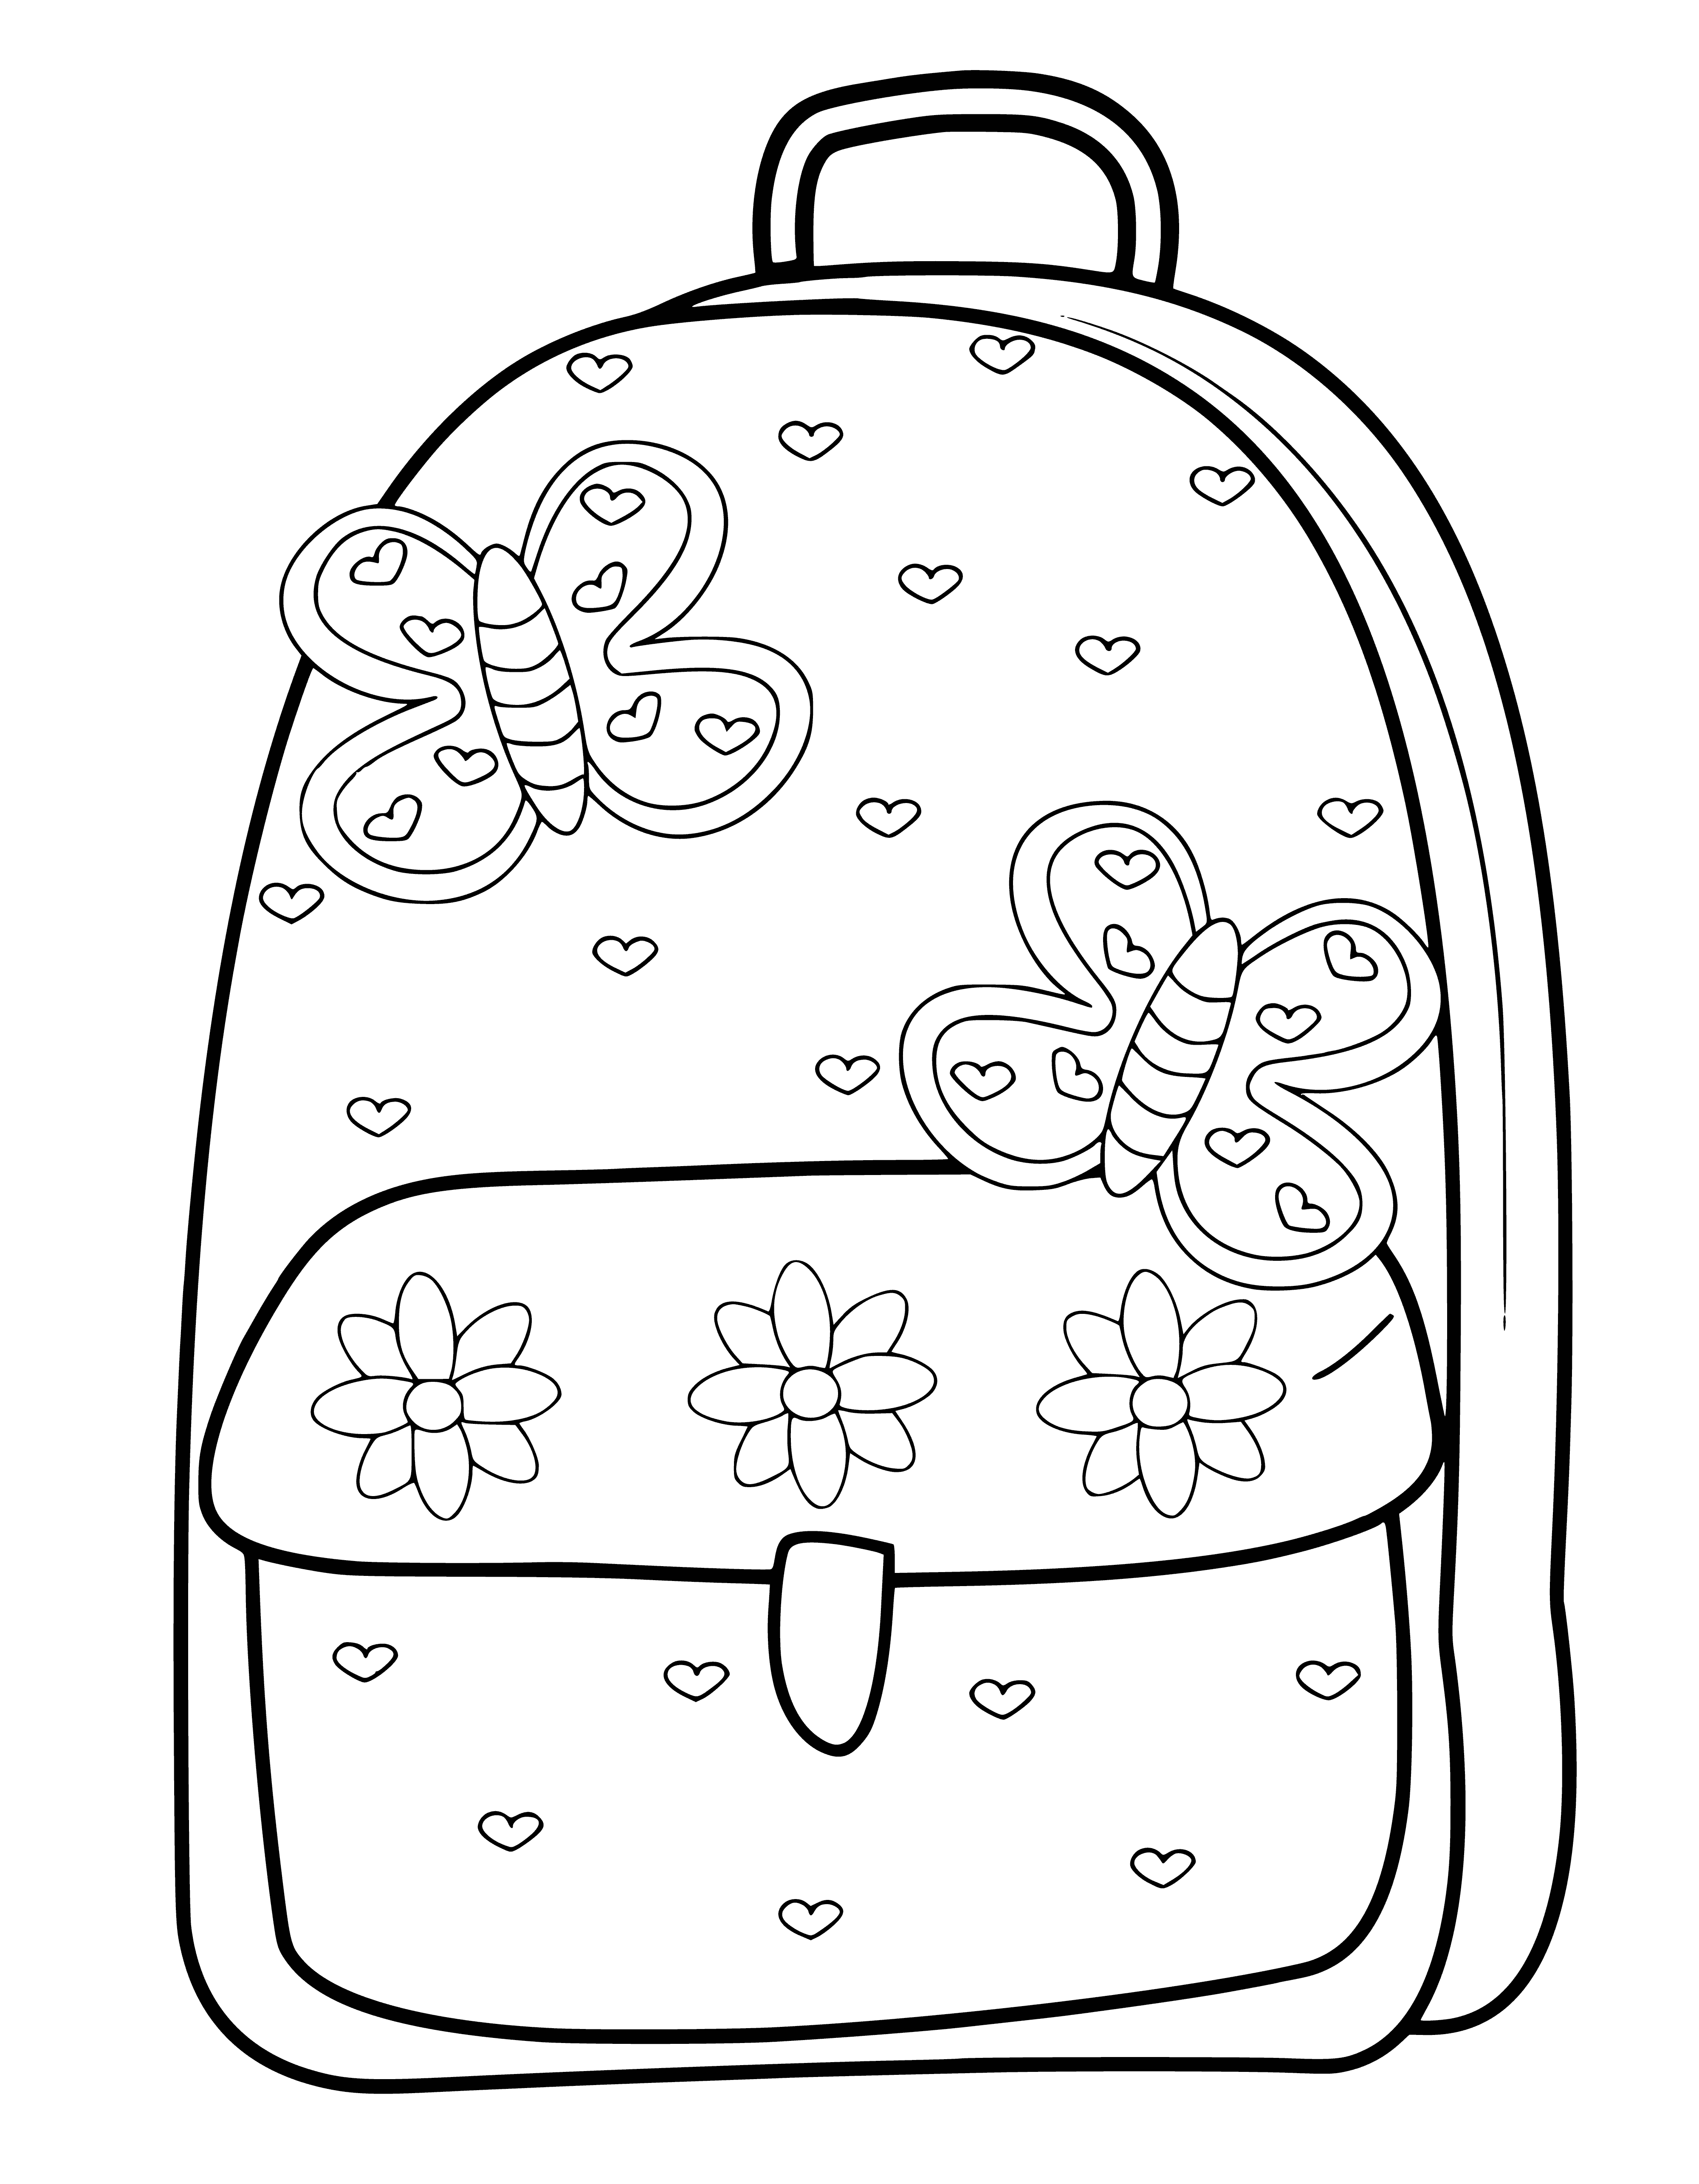 coloring page: Girl in school backpack looking happy and excited on way to school. Backpack full of books, pencil case, and other items. #backtoschool